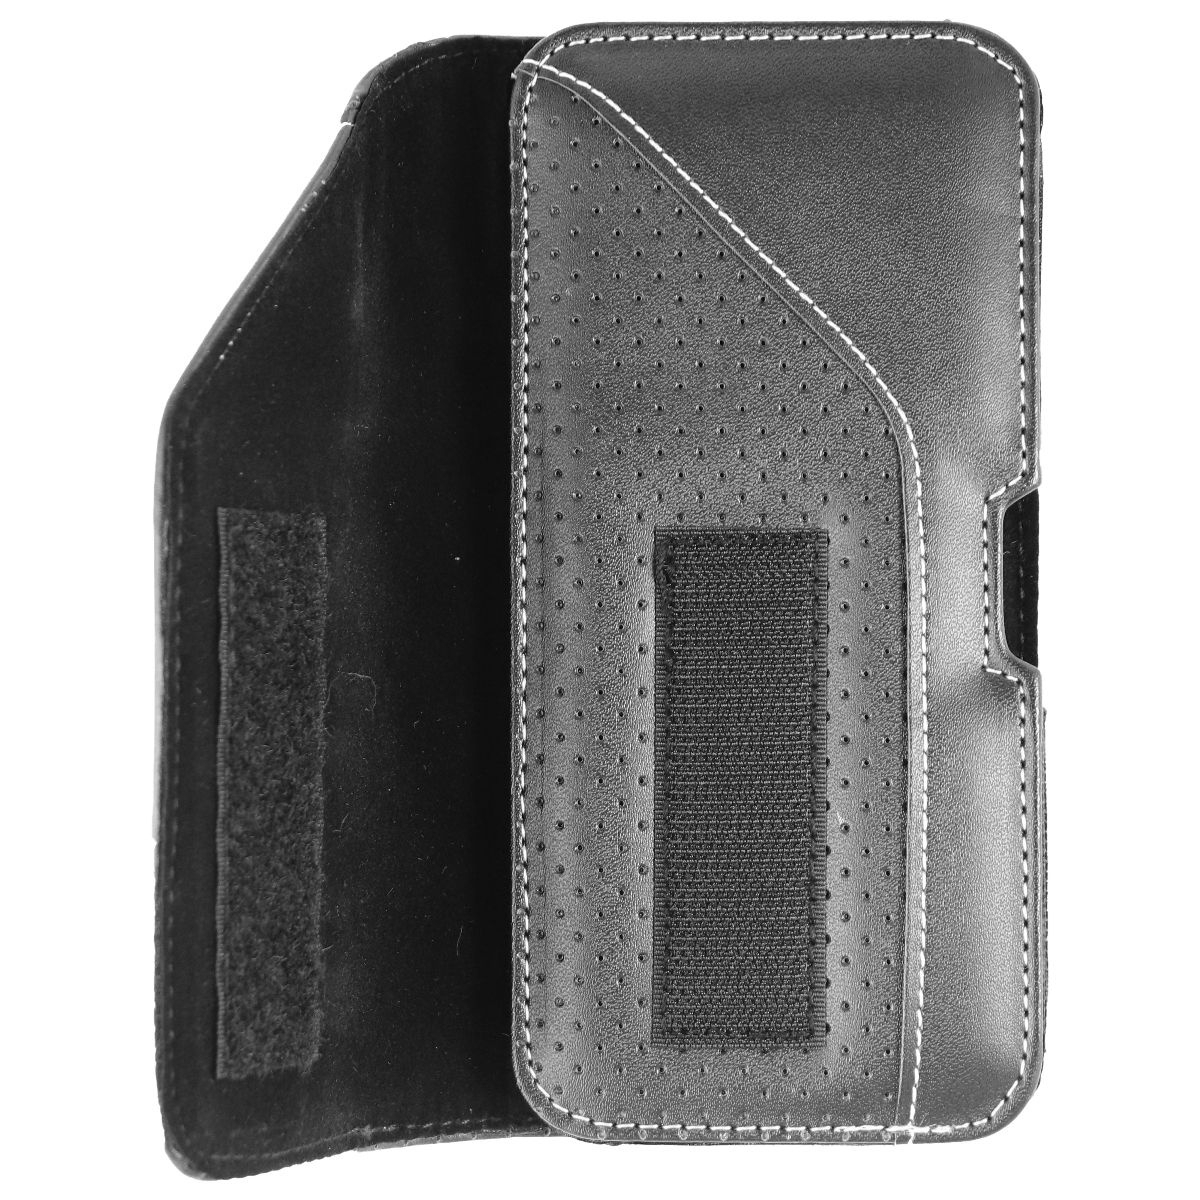 MWorks! Universal Holster Pouch Case For Up To 6-inch Smartphones - Black/White